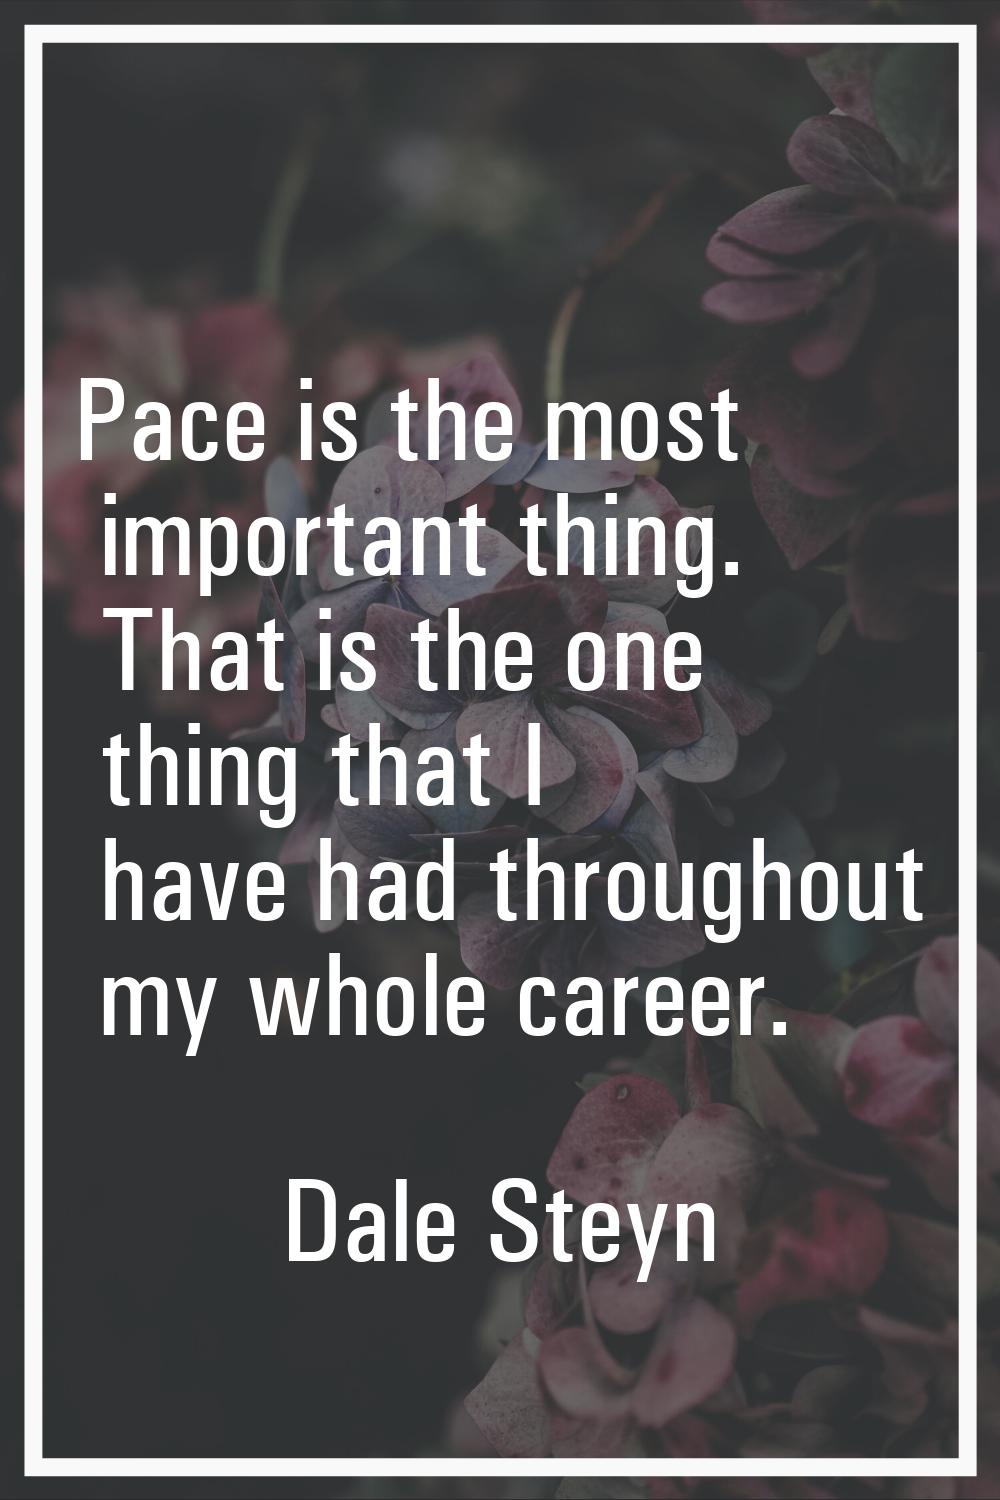 Pace is the most important thing. That is the one thing that I have had throughout my whole career.